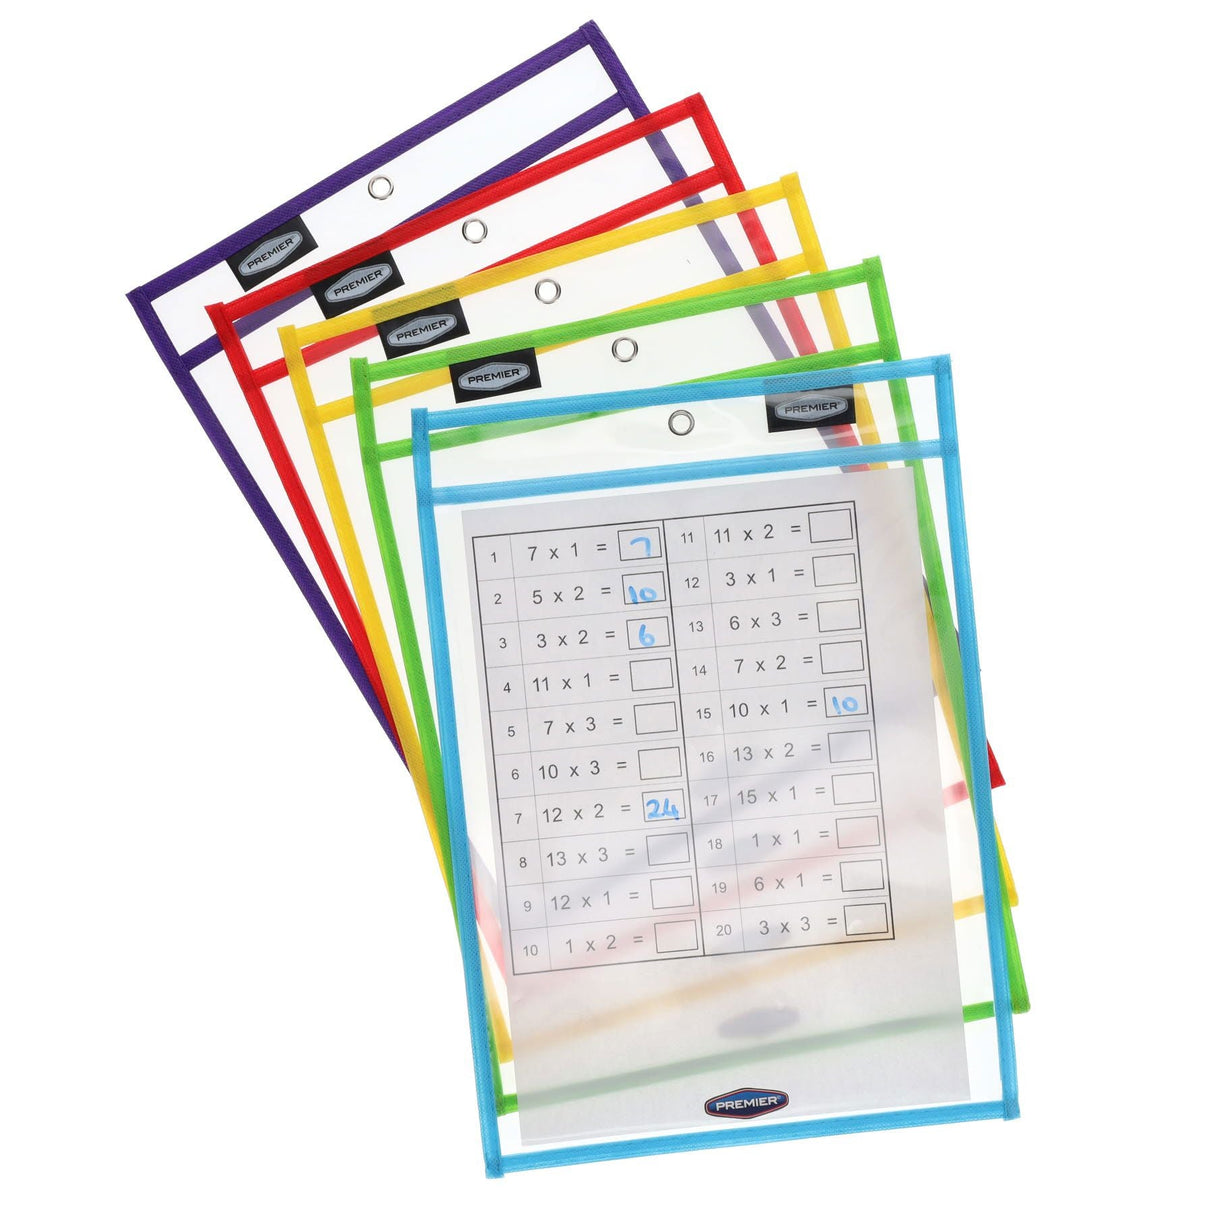 Student Solutions Dry Erase Pockets - Pack of 5-Dry Wipe Pocket Storage-Student Solutions|StationeryShop.co.uk